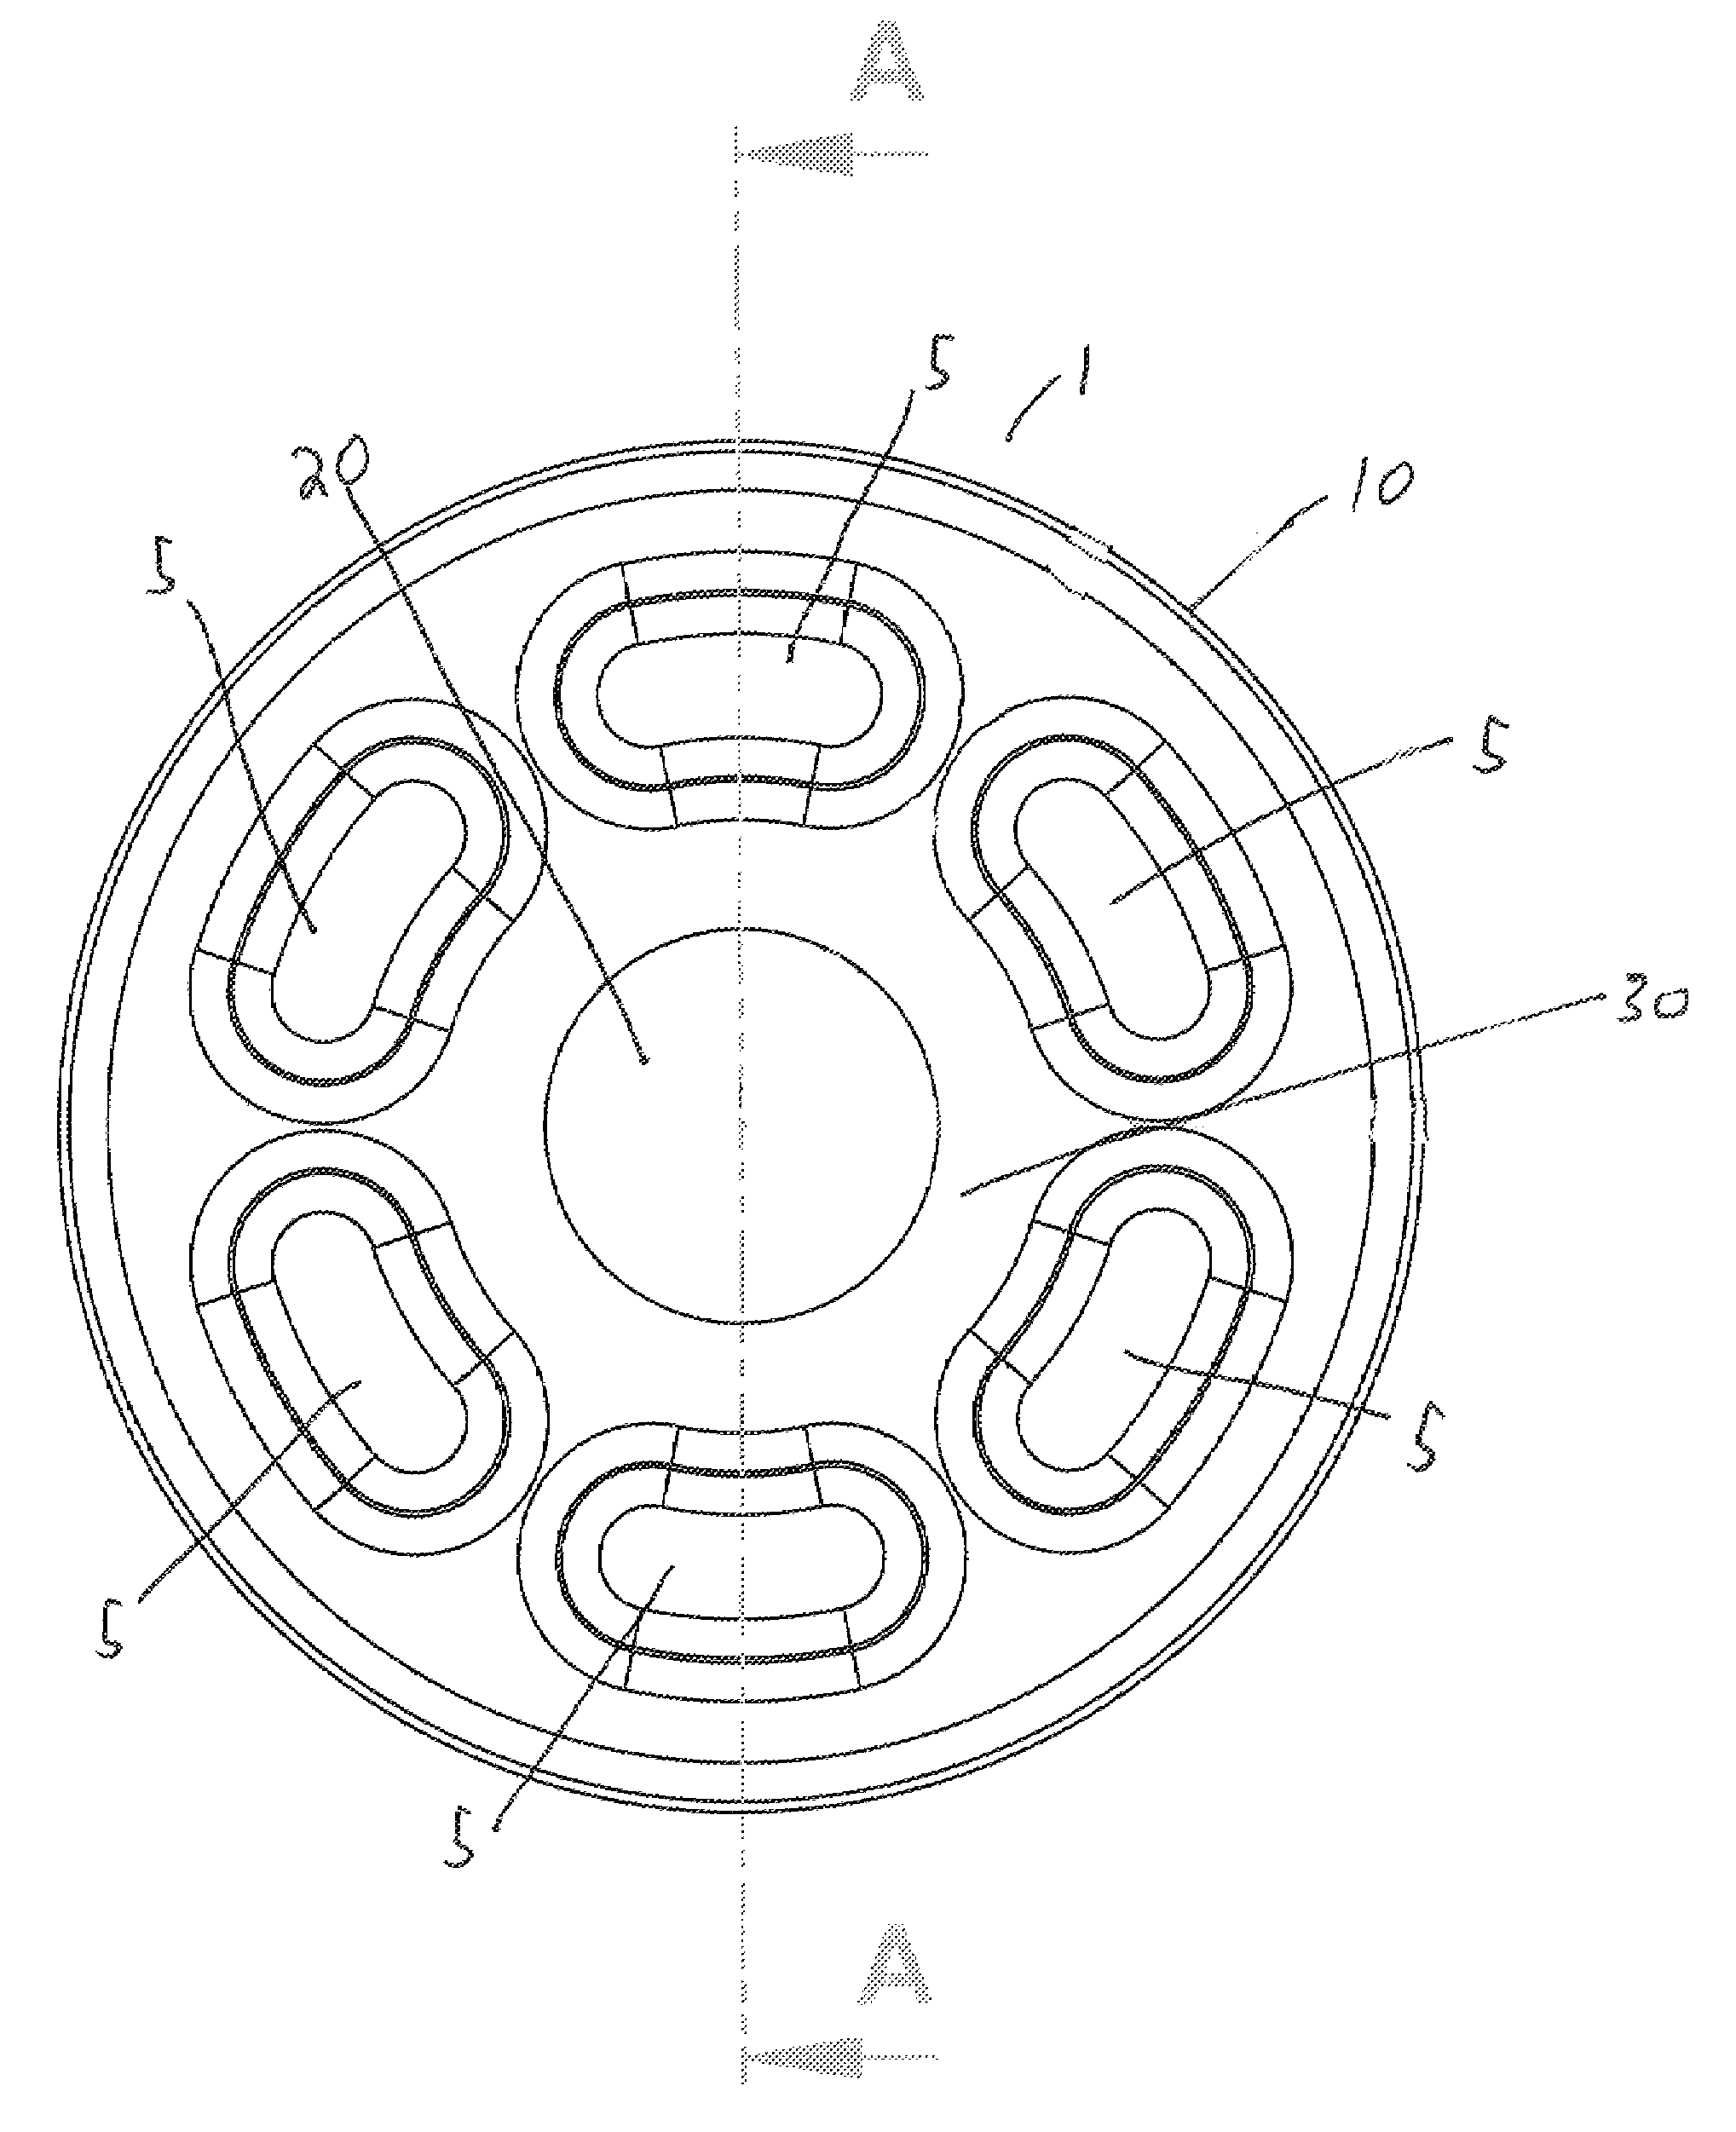 Coaxial RF device thermally conductive polymer insulator and method of manufacture